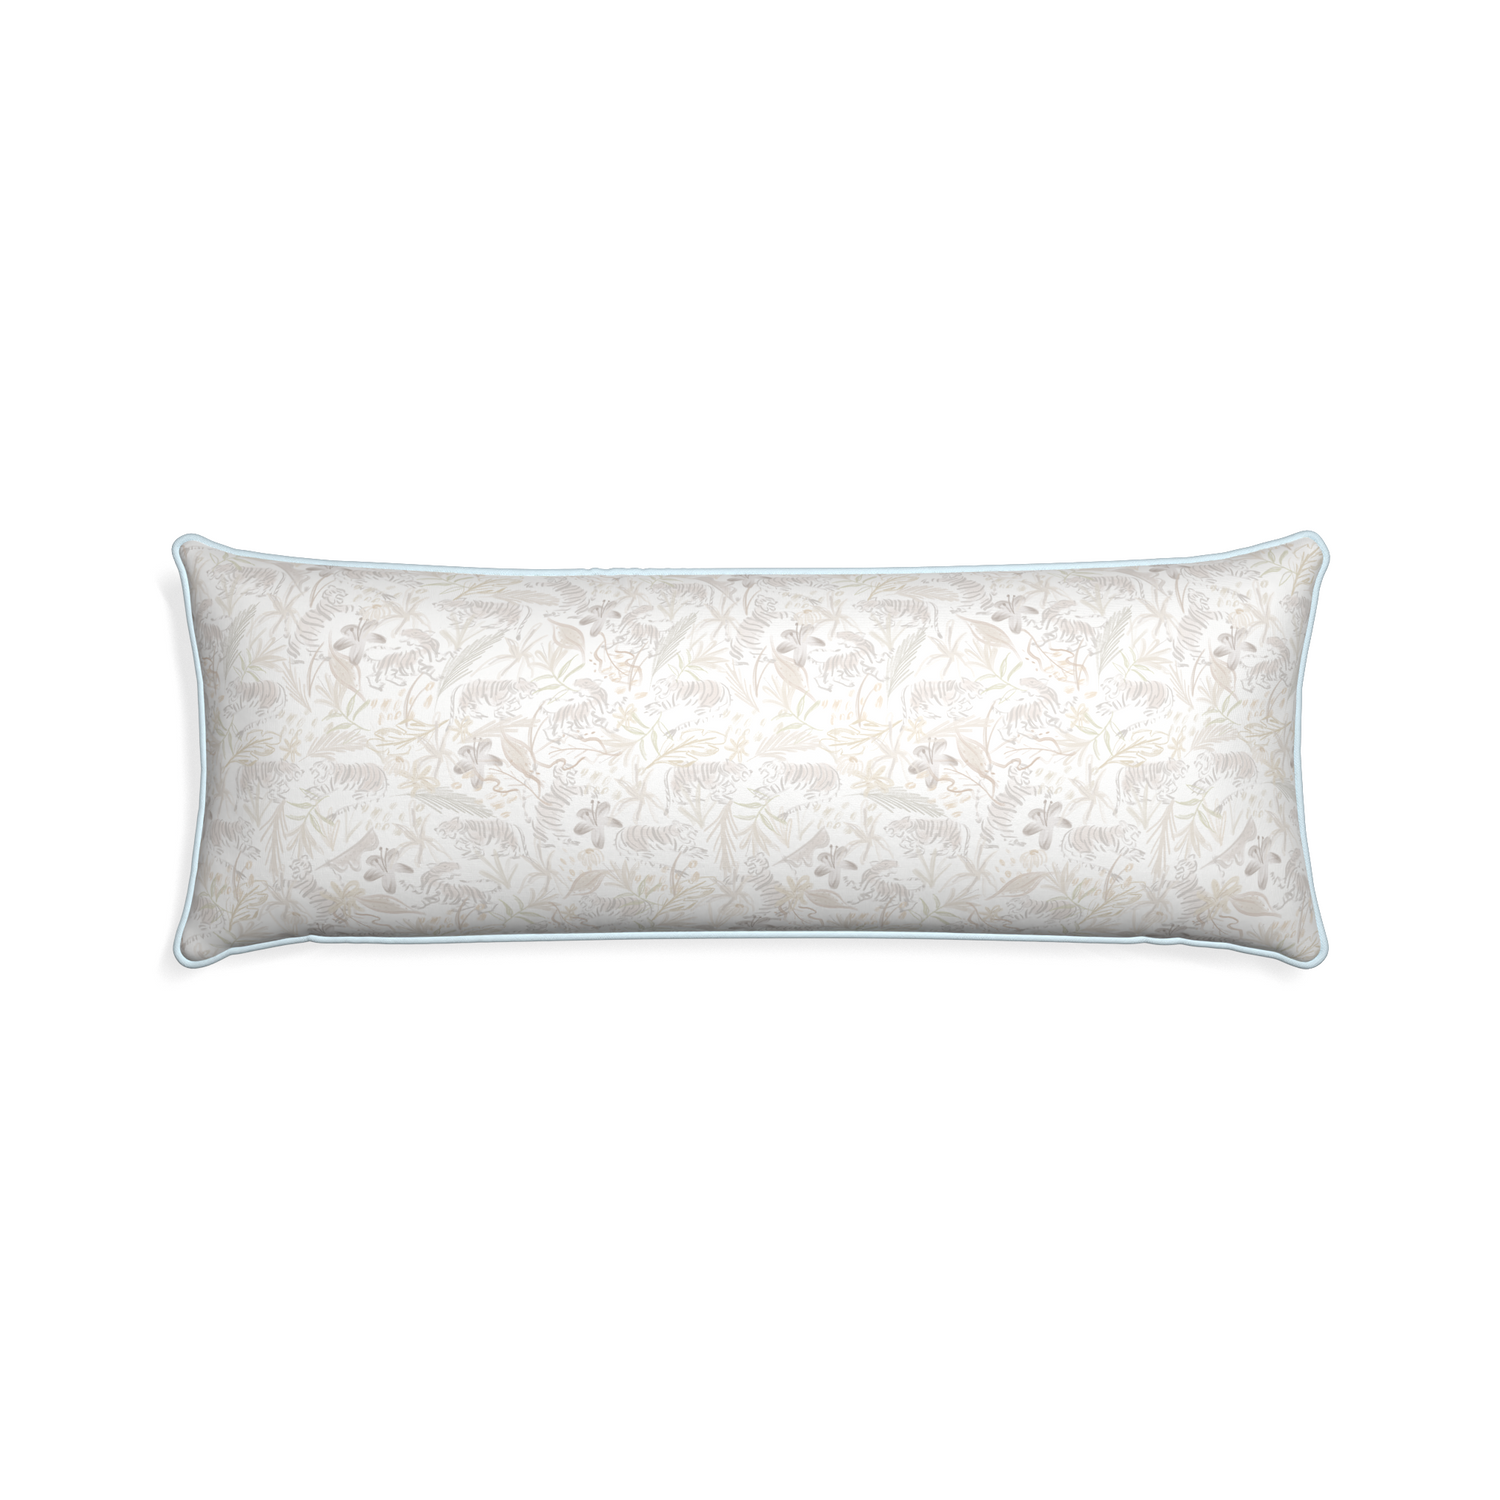 Xl-lumbar frida sand custom beige chinoiserie tigerpillow with powder piping on white background